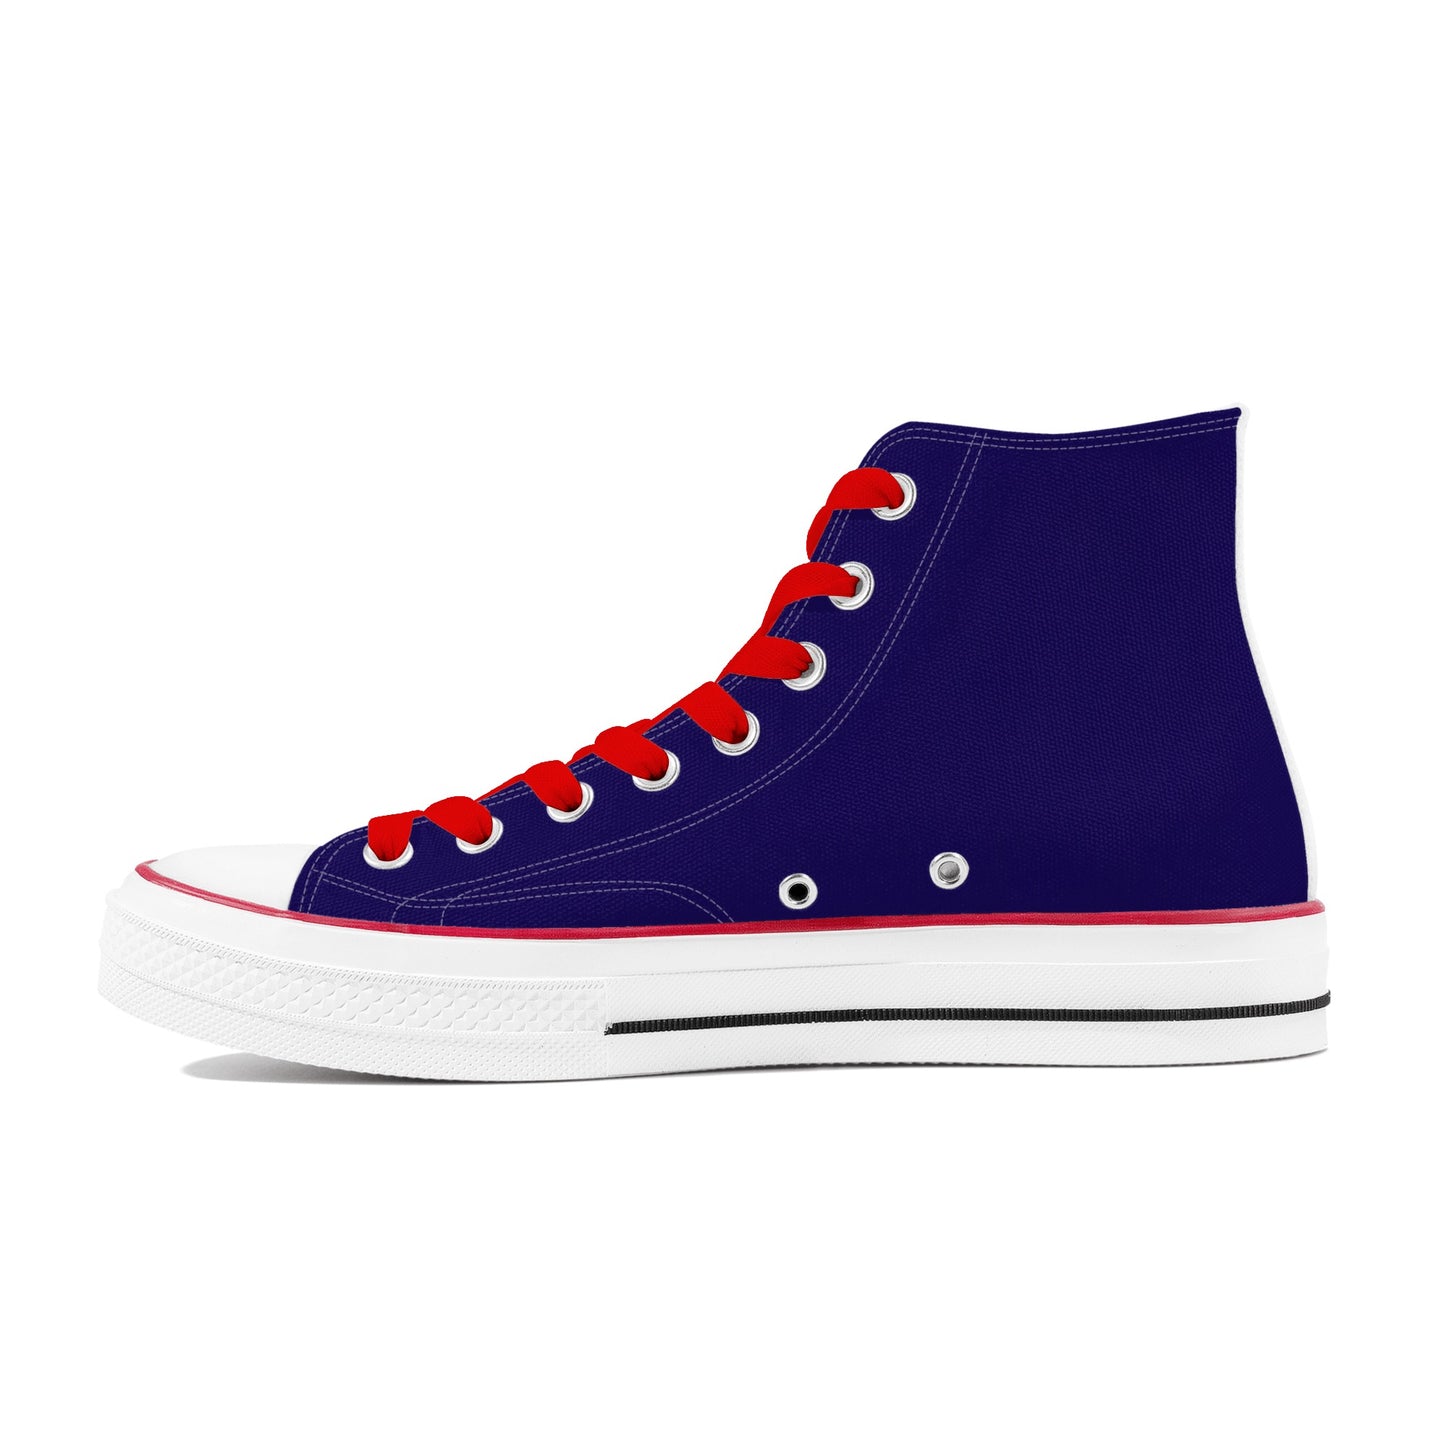 Loki - Classic High Top Canvas Shoes